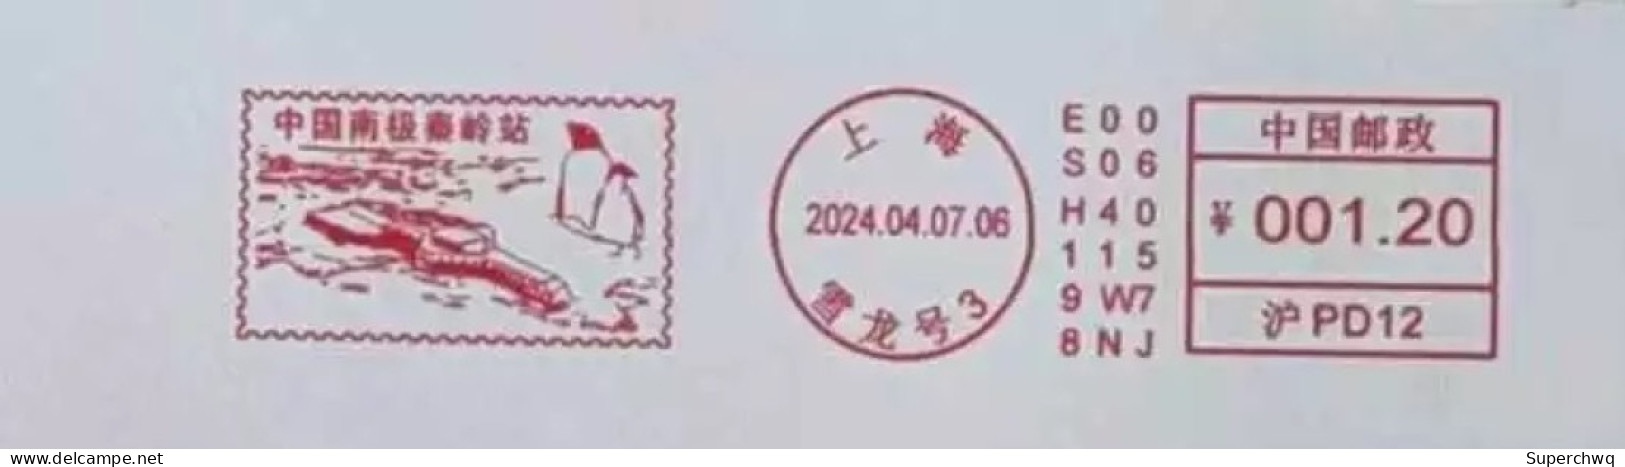 China Posted Cover，China Antarctic Scientific Research Station, Qinling Station Postage Machine Stamp - Enveloppes